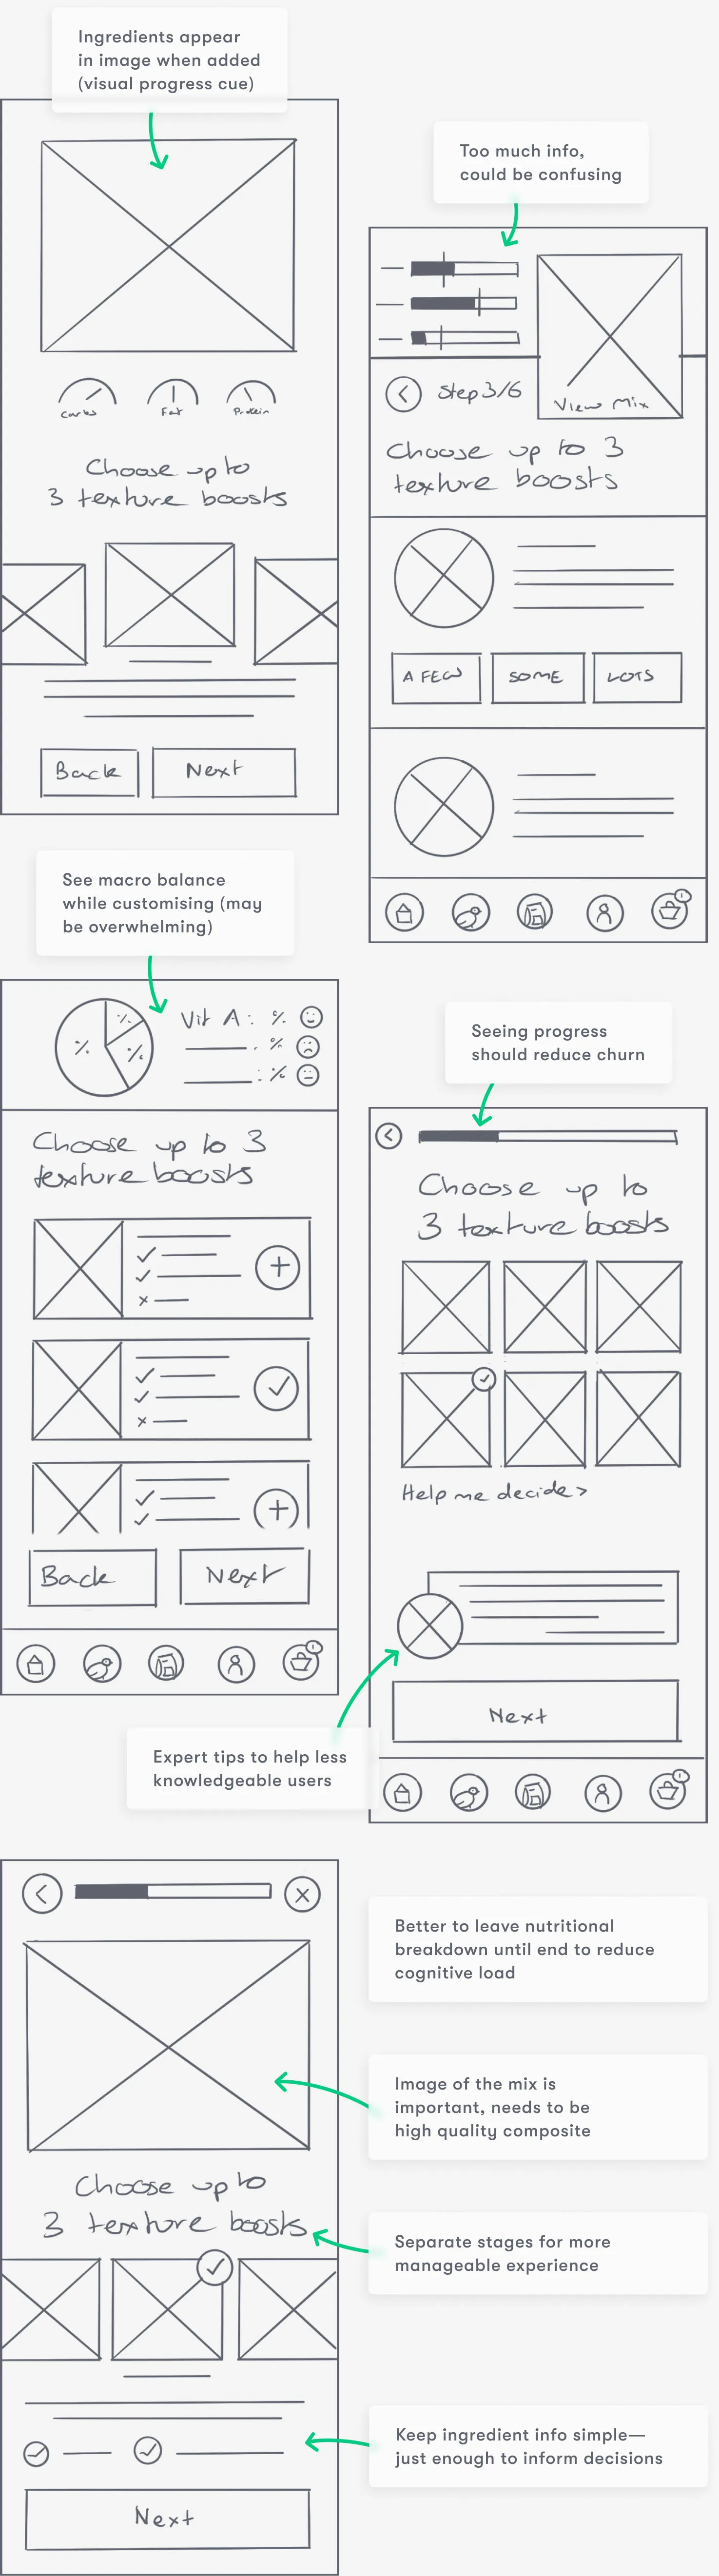 wireframes showing various options for the mix customisation screens